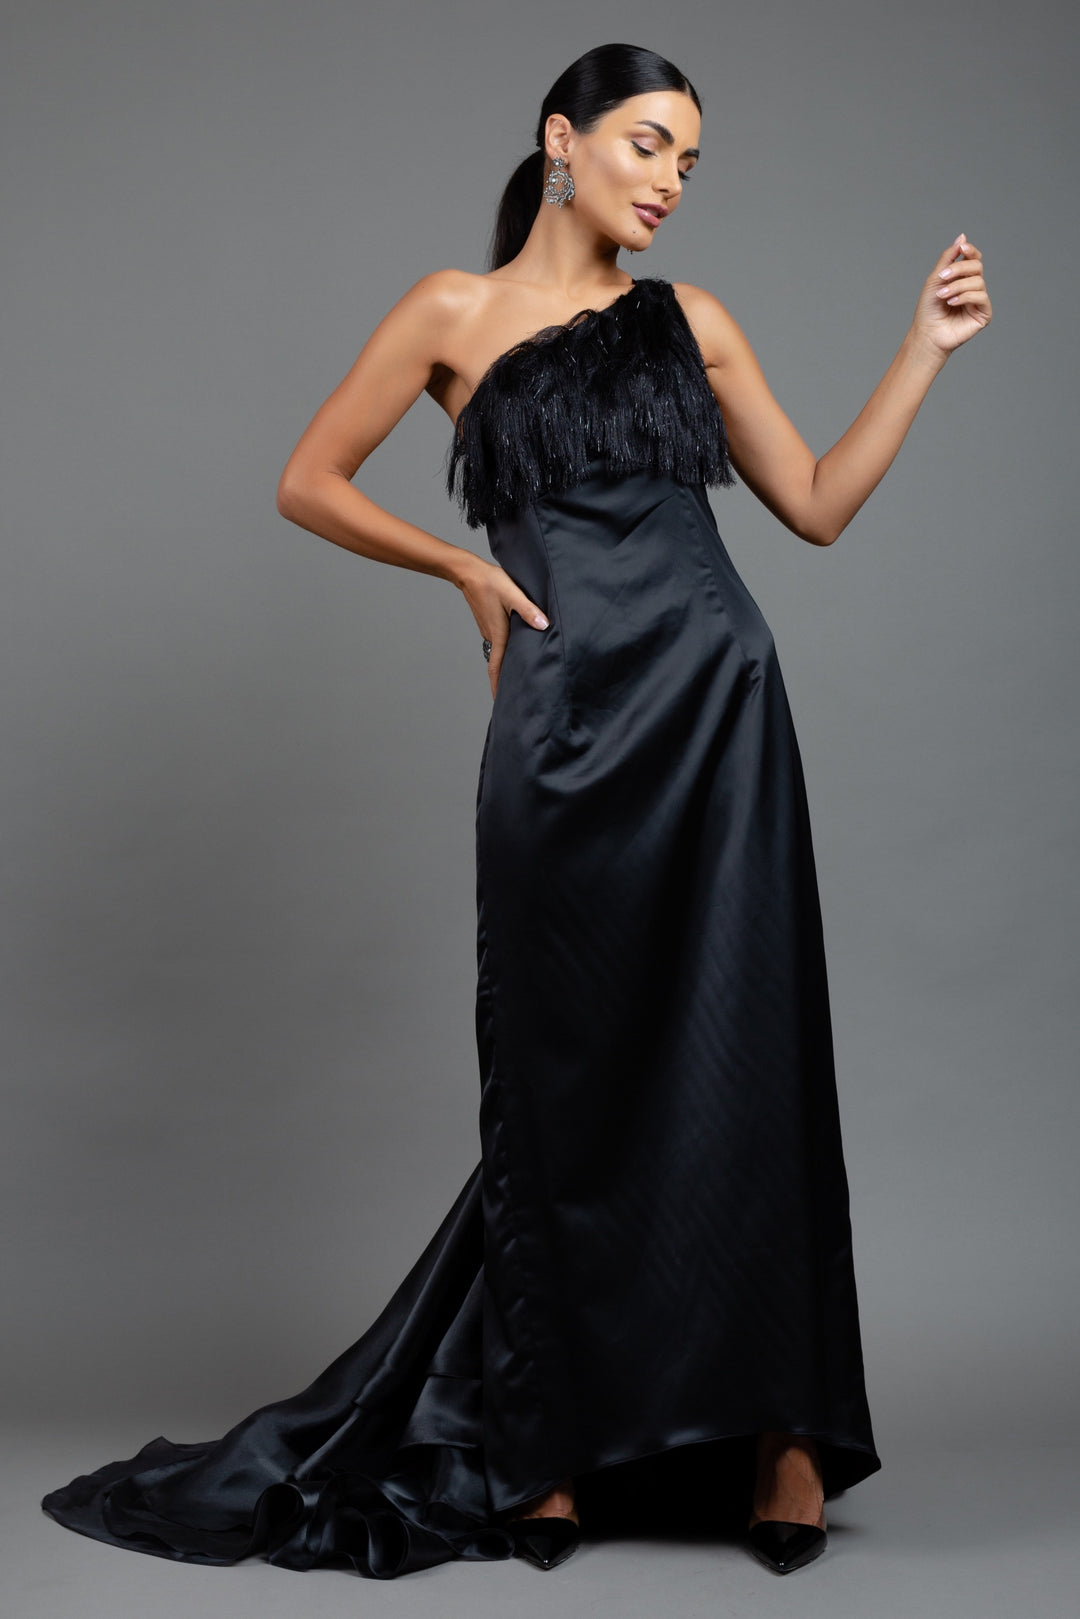 BLACK GOWN WITH FRINGES